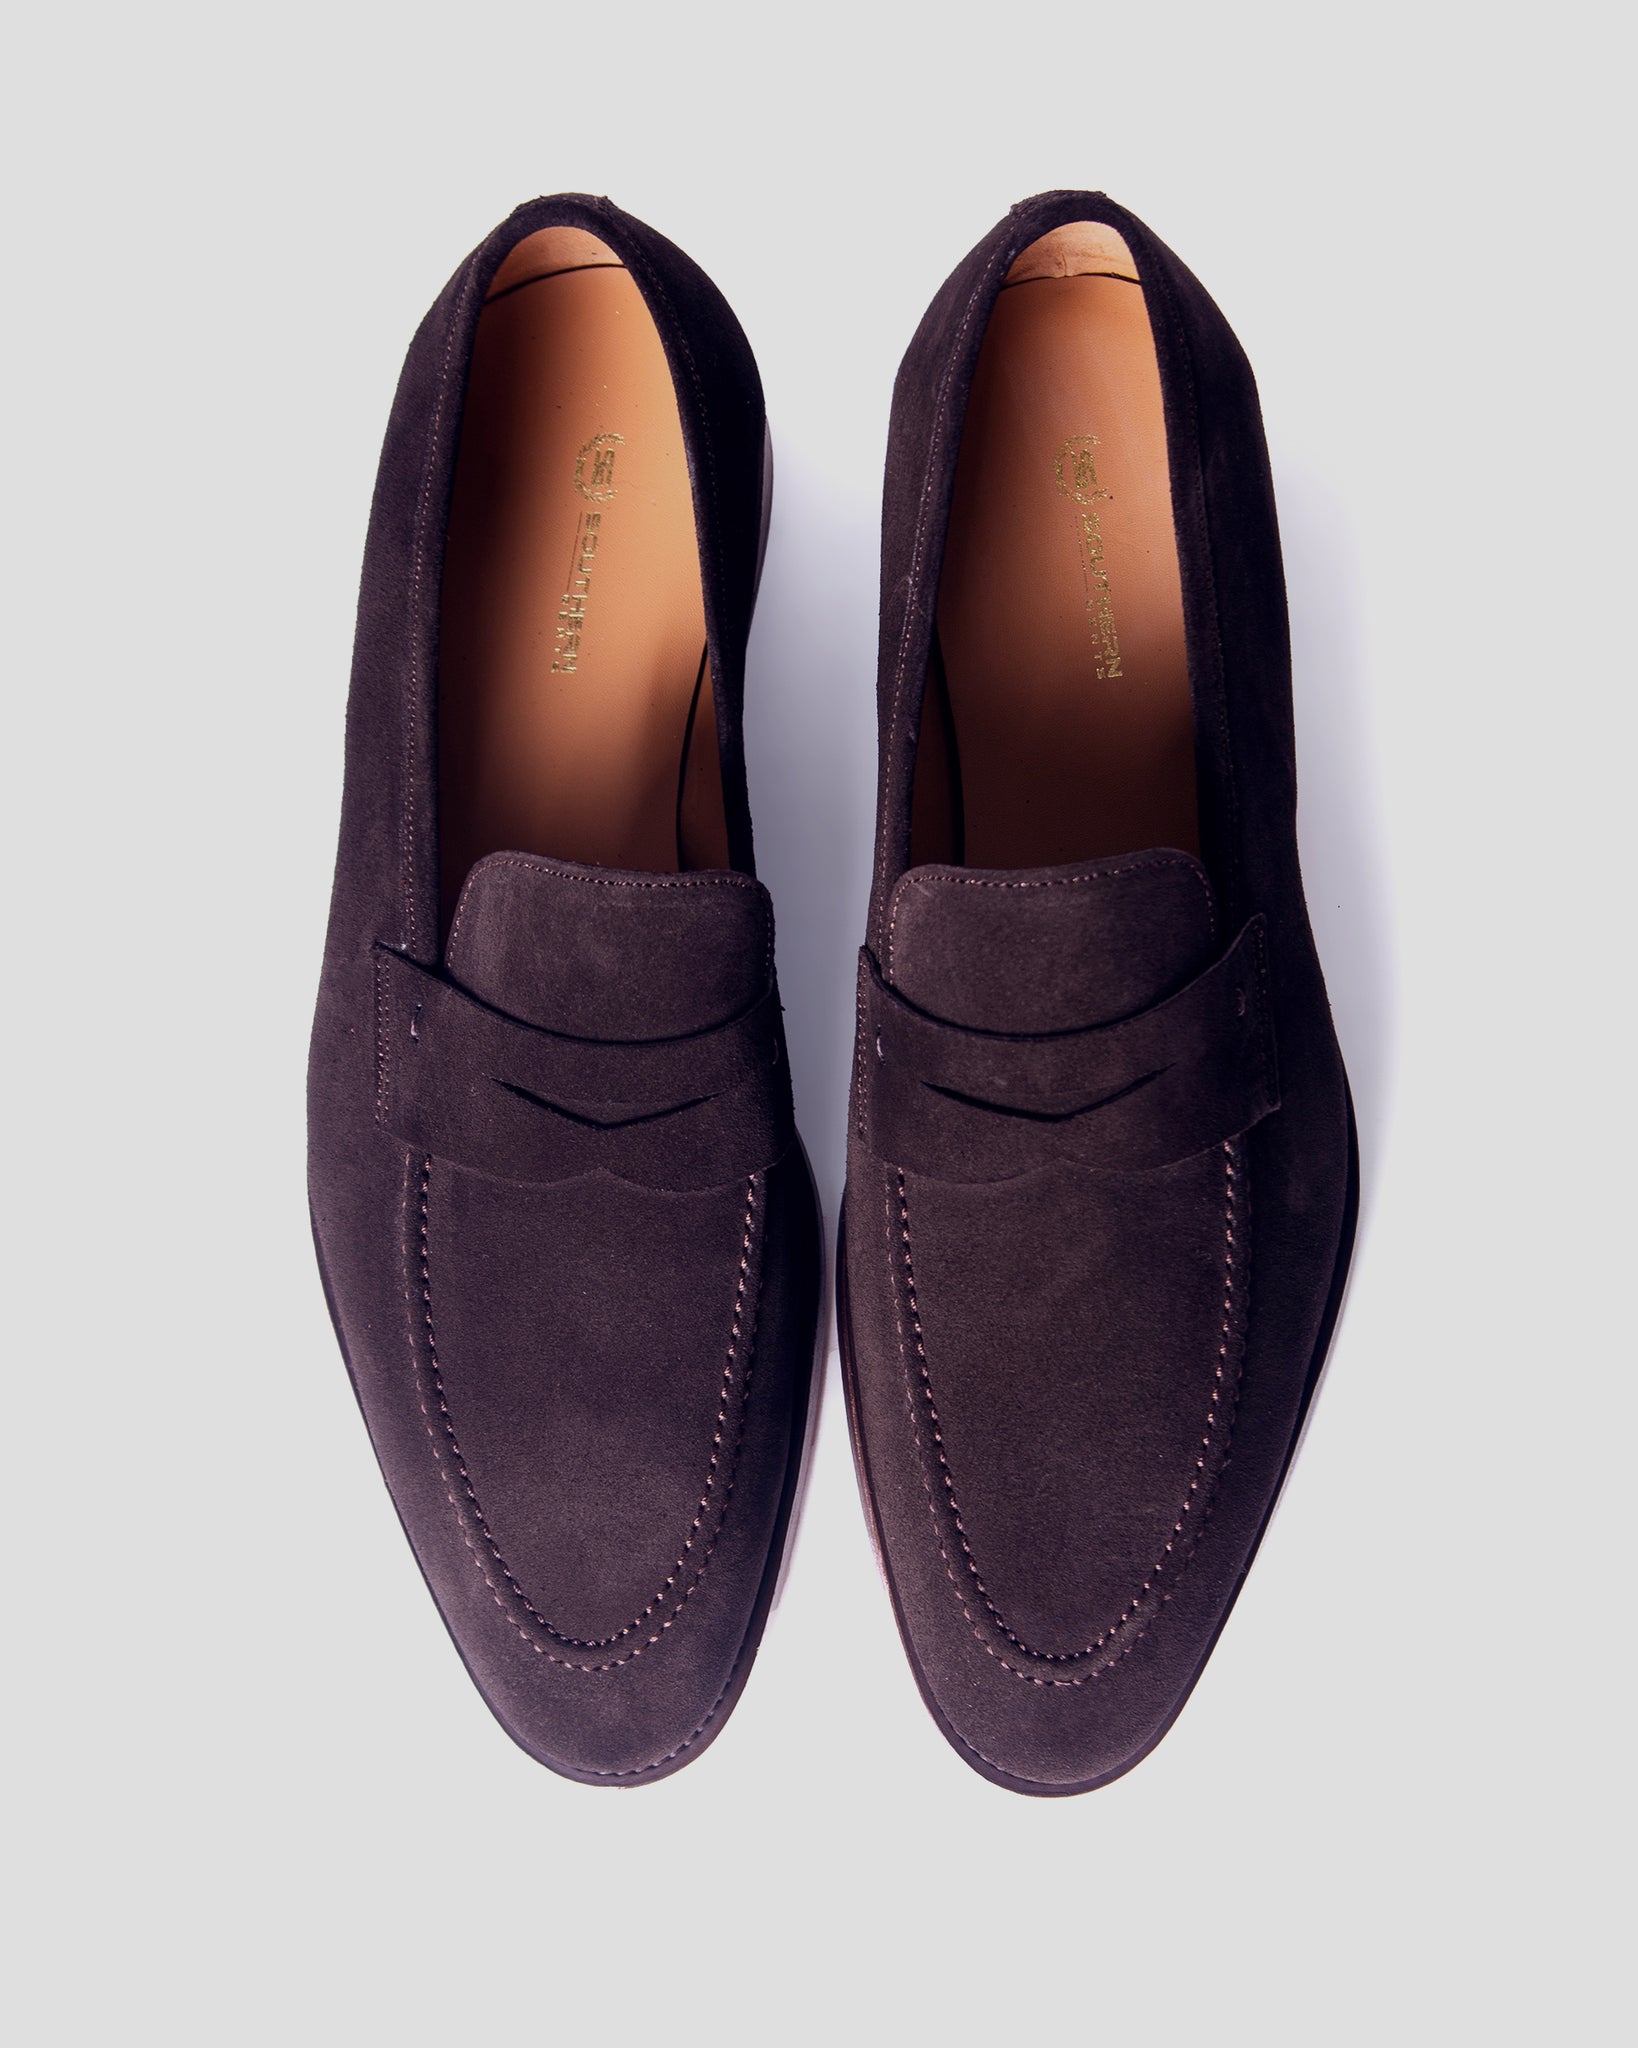 Southern Gents Penny Loafer - Dark Brown Suede